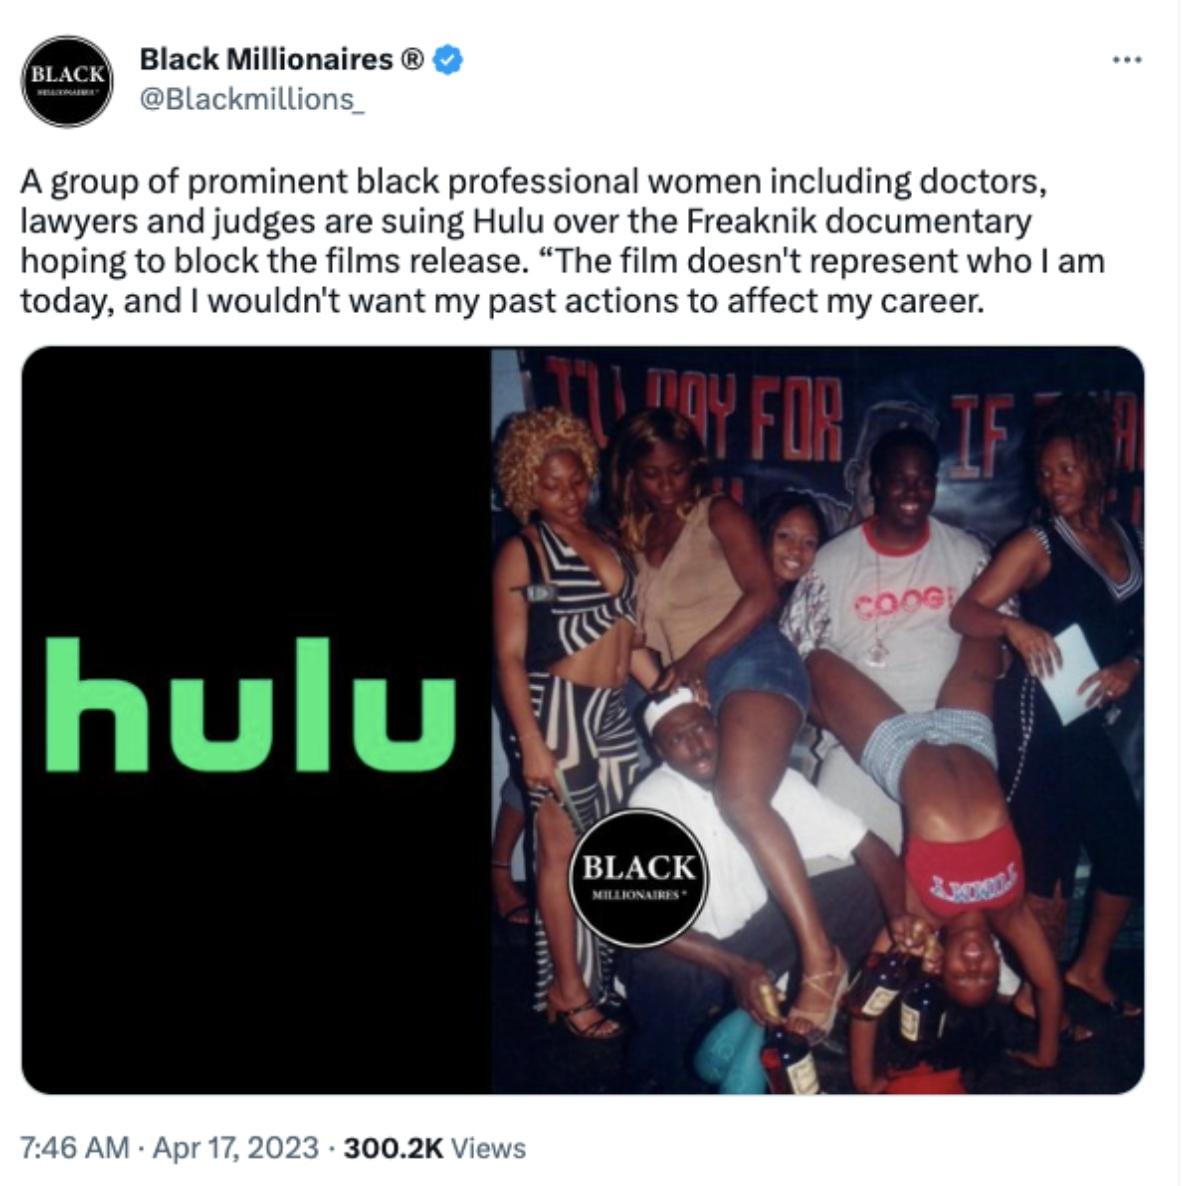 A tweet about Freaknik with block party attendees, the Hulu logo, and Black Millionaires logo